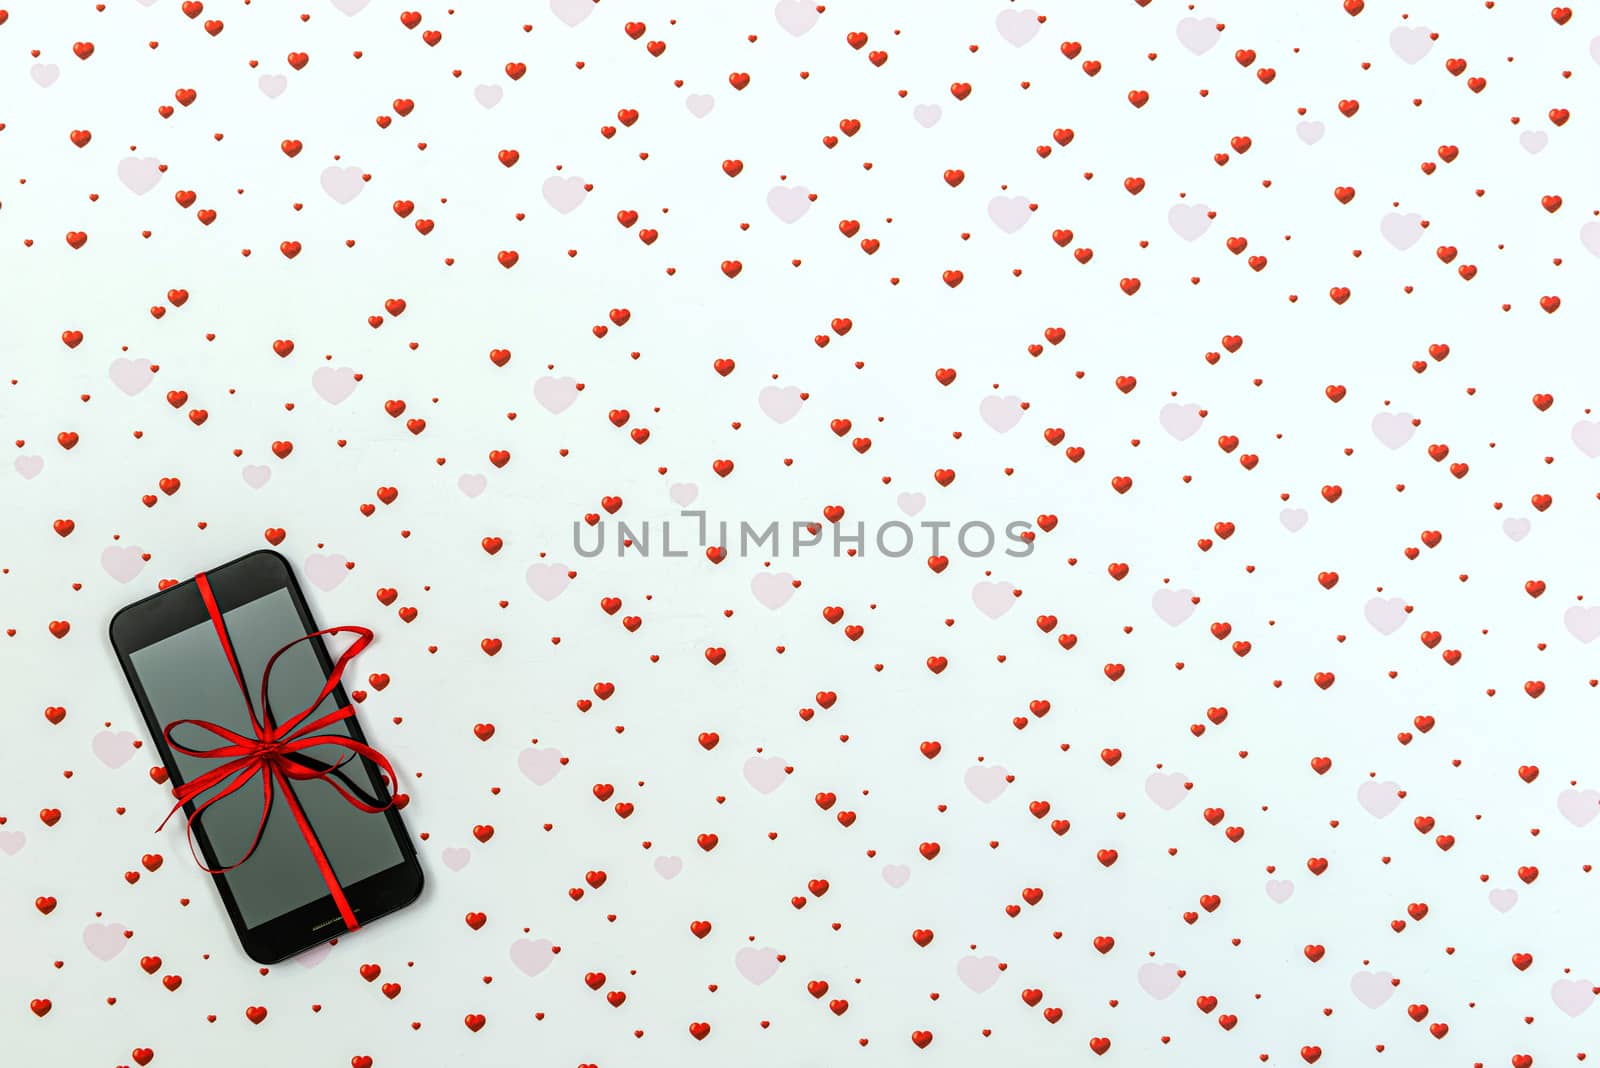 Smartphone with blank screen and red ribbon on a white bacground with colorful hearts shapes. Concept of Valentines day, birgtday, Christmas gift